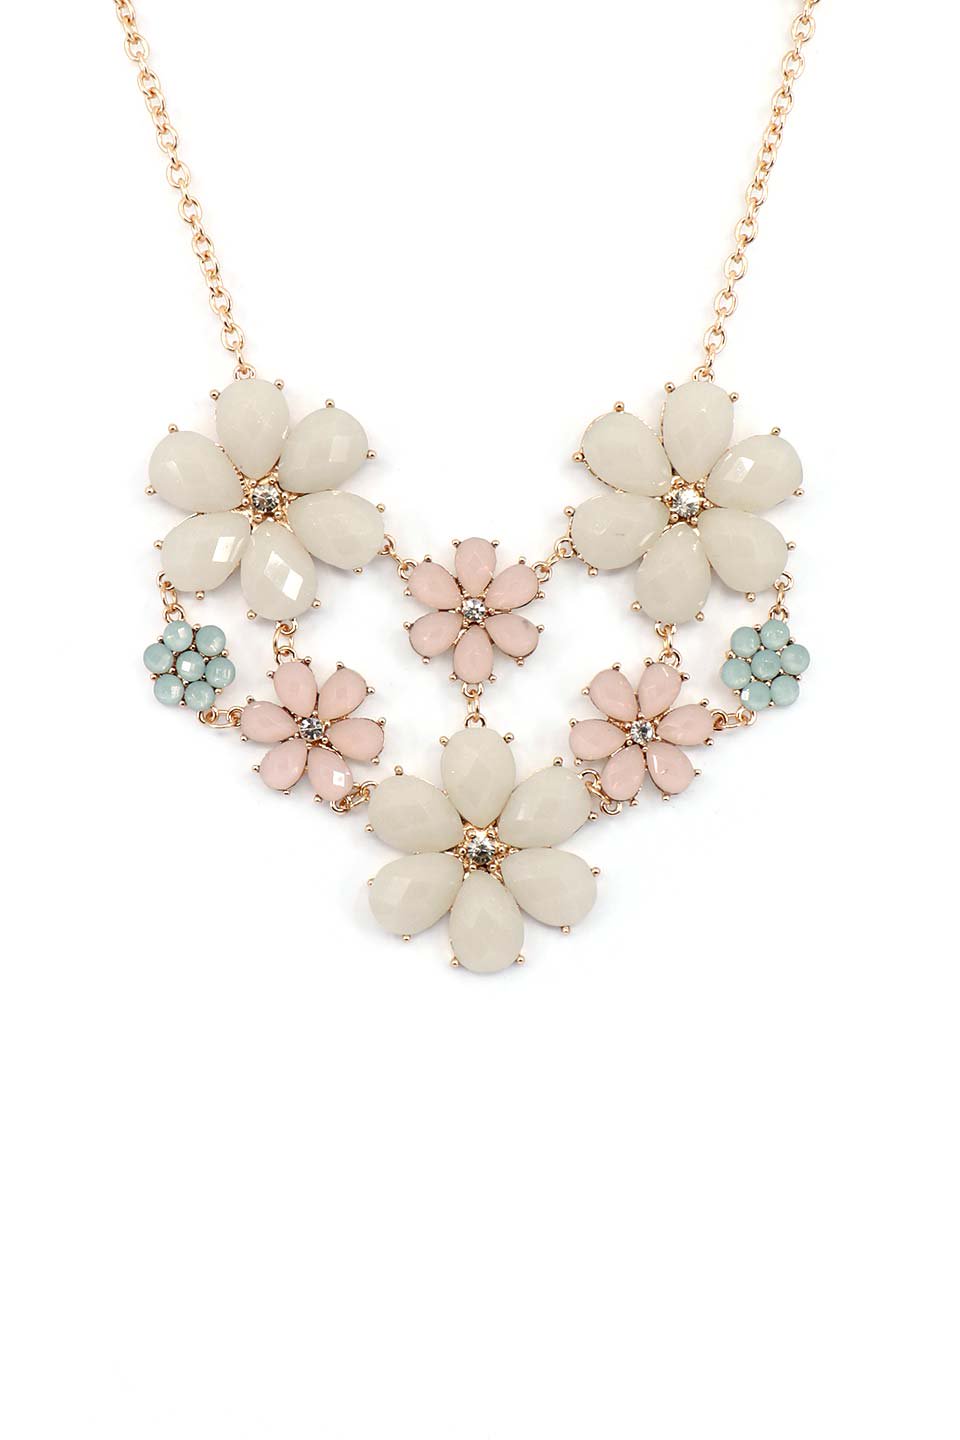 Floral Statement Necklace フラワーモチーフ・ネックレス